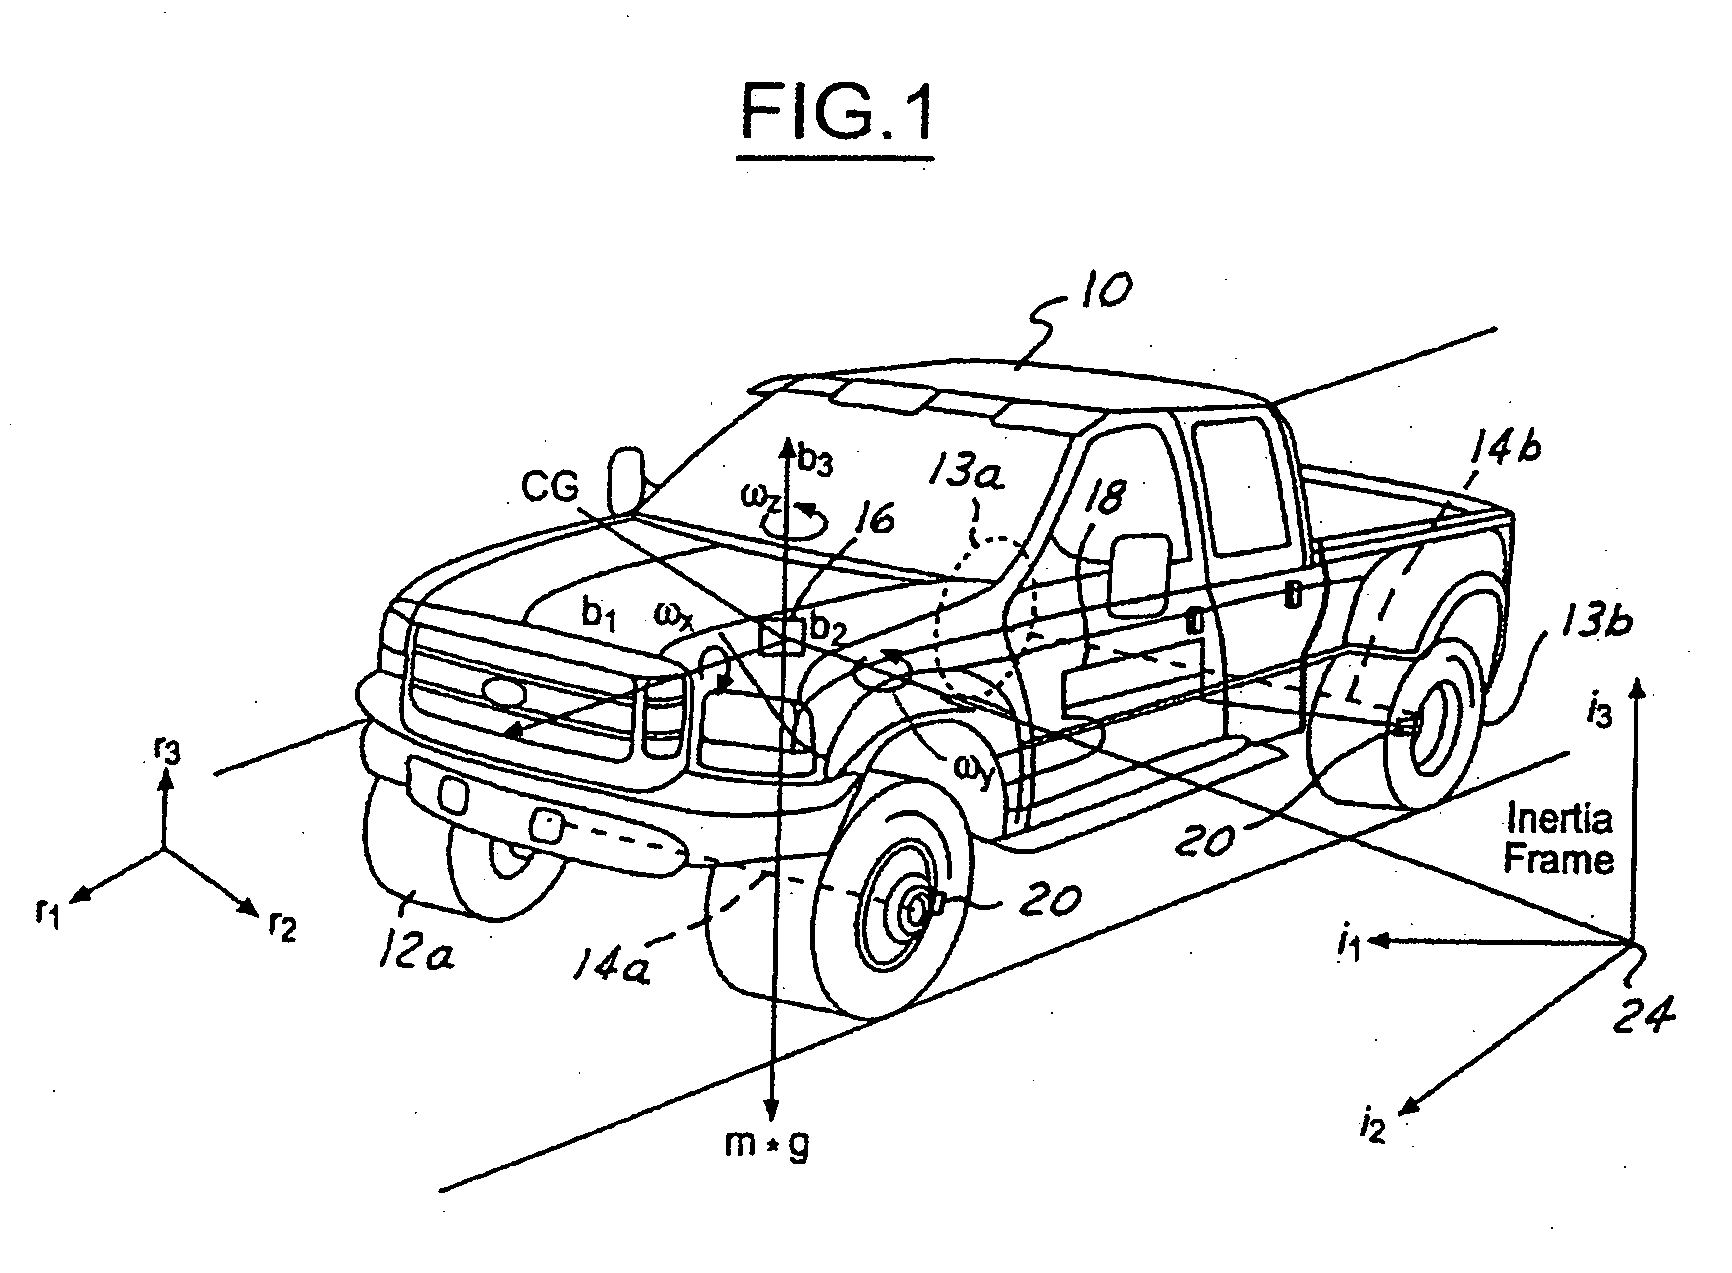 Method and apparatus for determining adaptive brake gain parameters for use in a safety system of an automotive vehicle